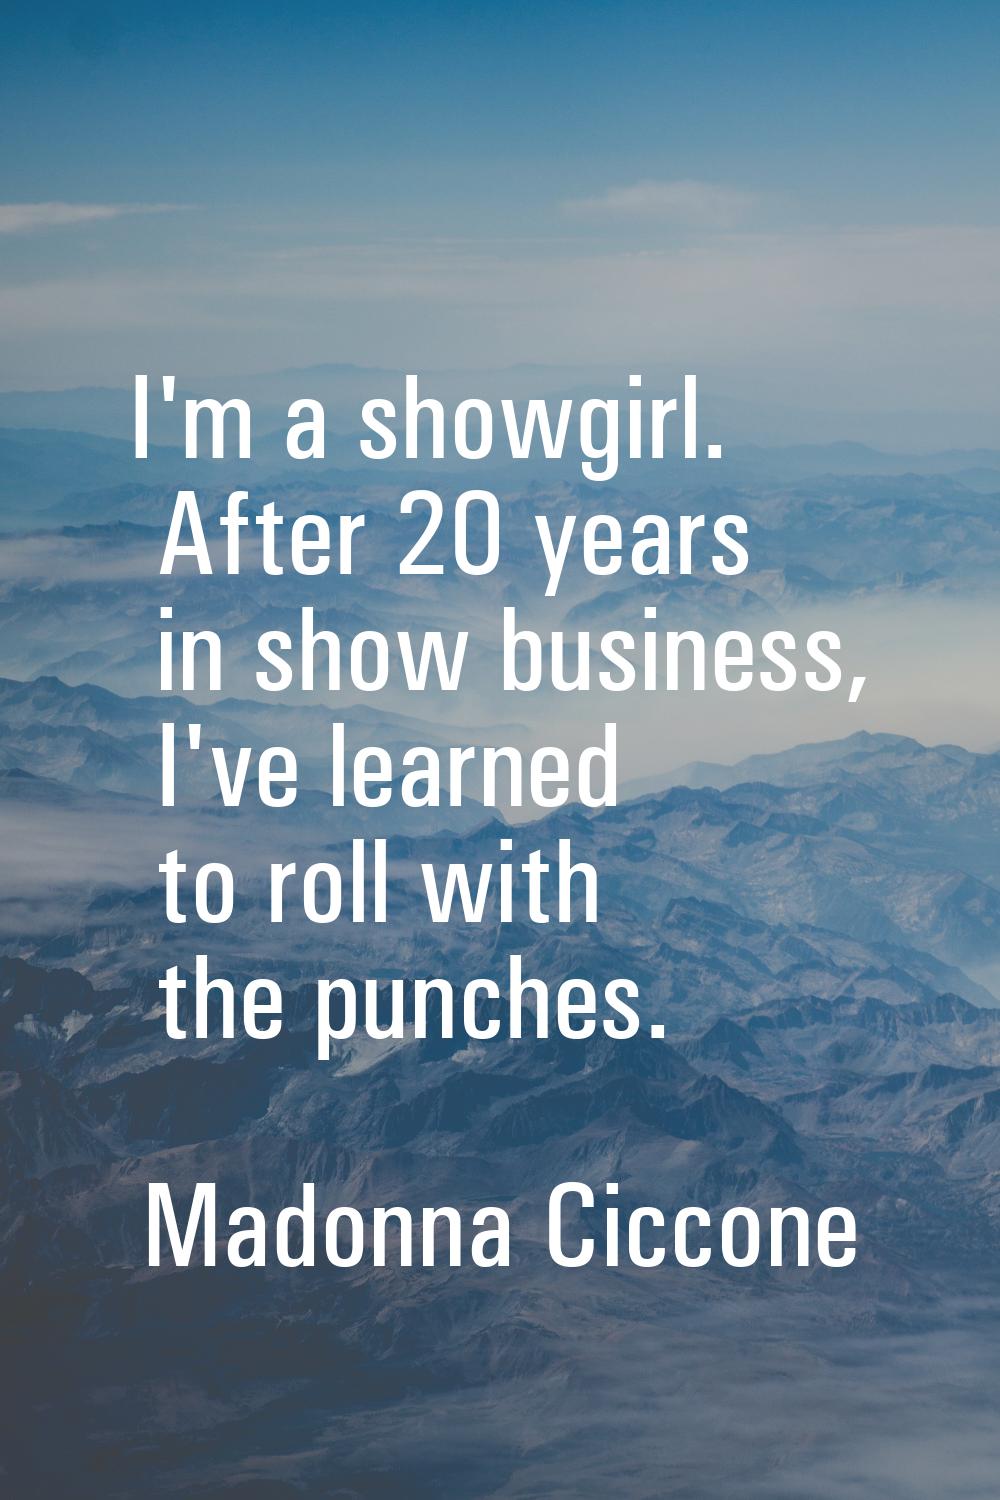 I'm a showgirl. After 20 years in show business, I've learned to roll with the punches.